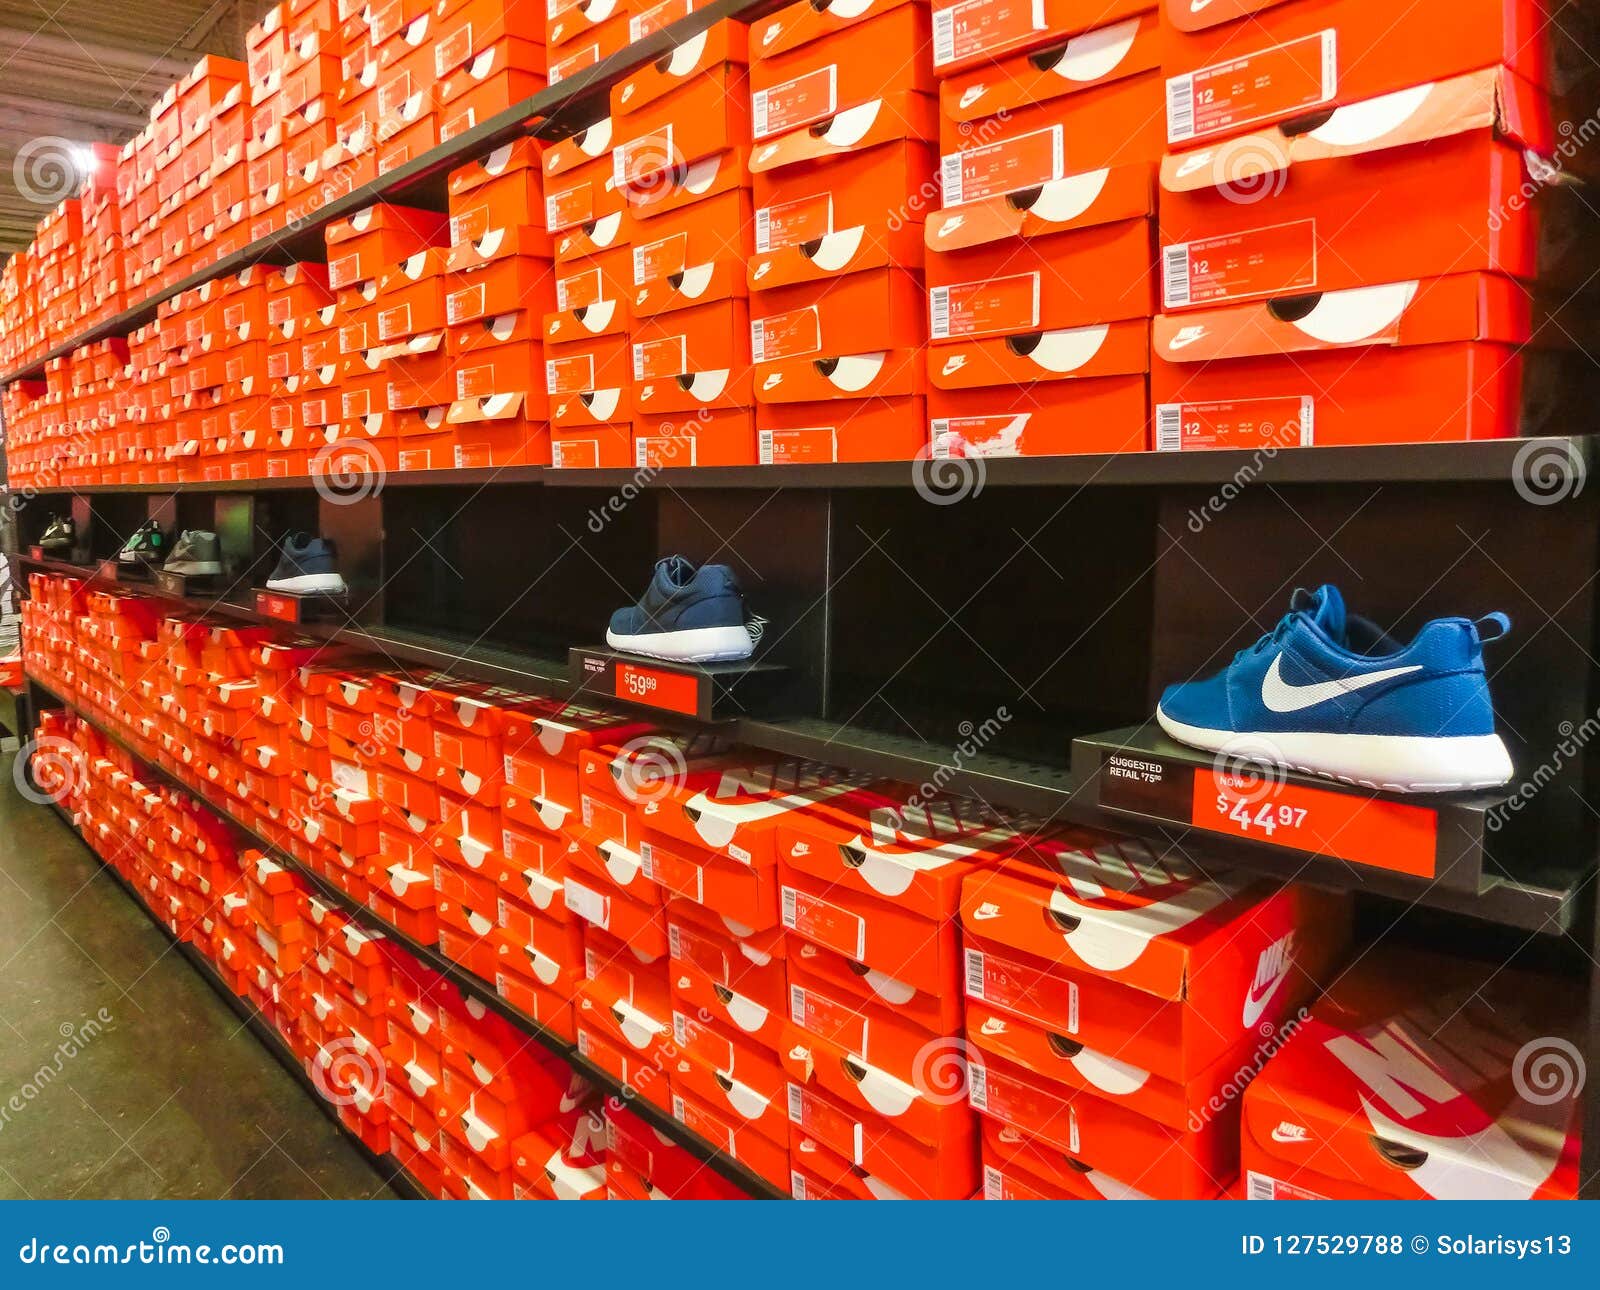 USA - May 8, 2018: Background of Stacked Nike Shoes Boxes at Orlando Premium Outlet at Orlando, USA Editorial Stock Photo - of background, orange: 127529788